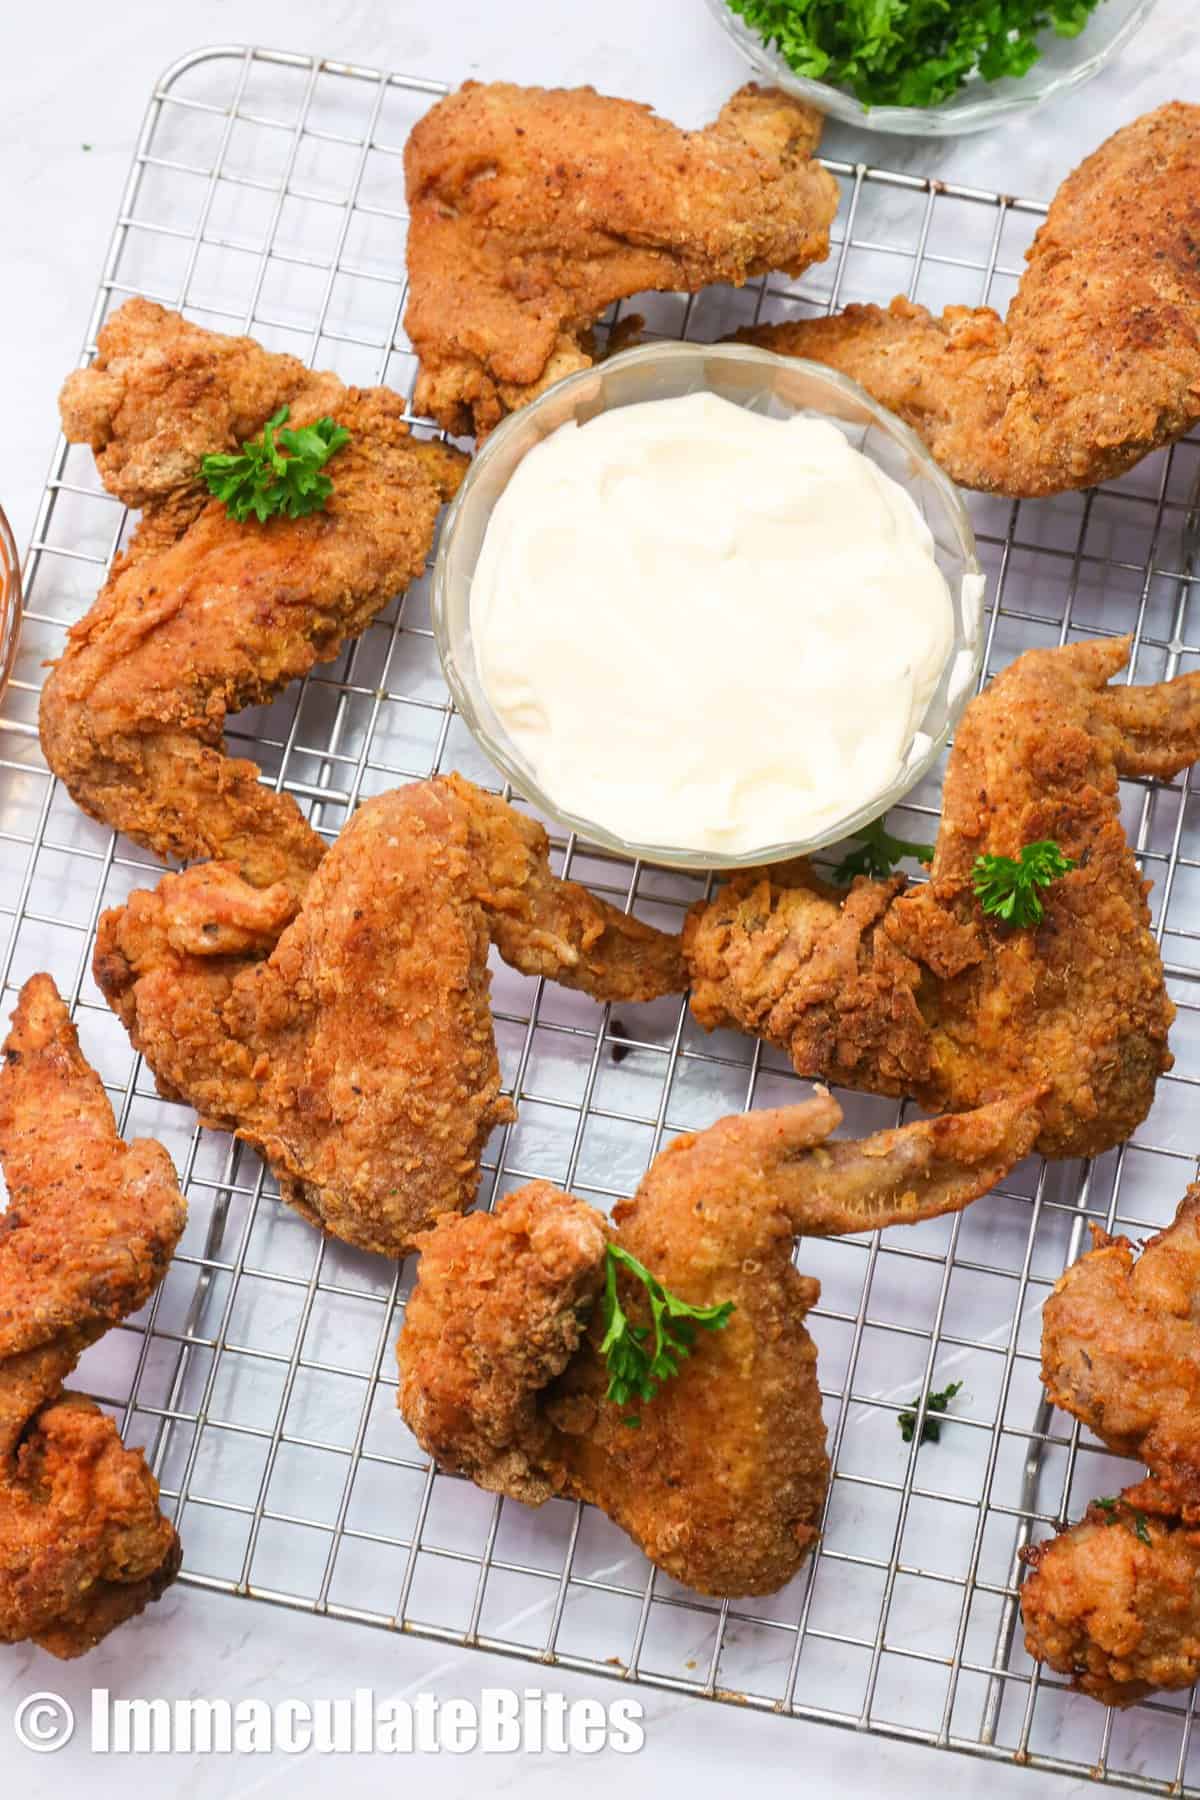 Fried chicken wings with ranch dressing